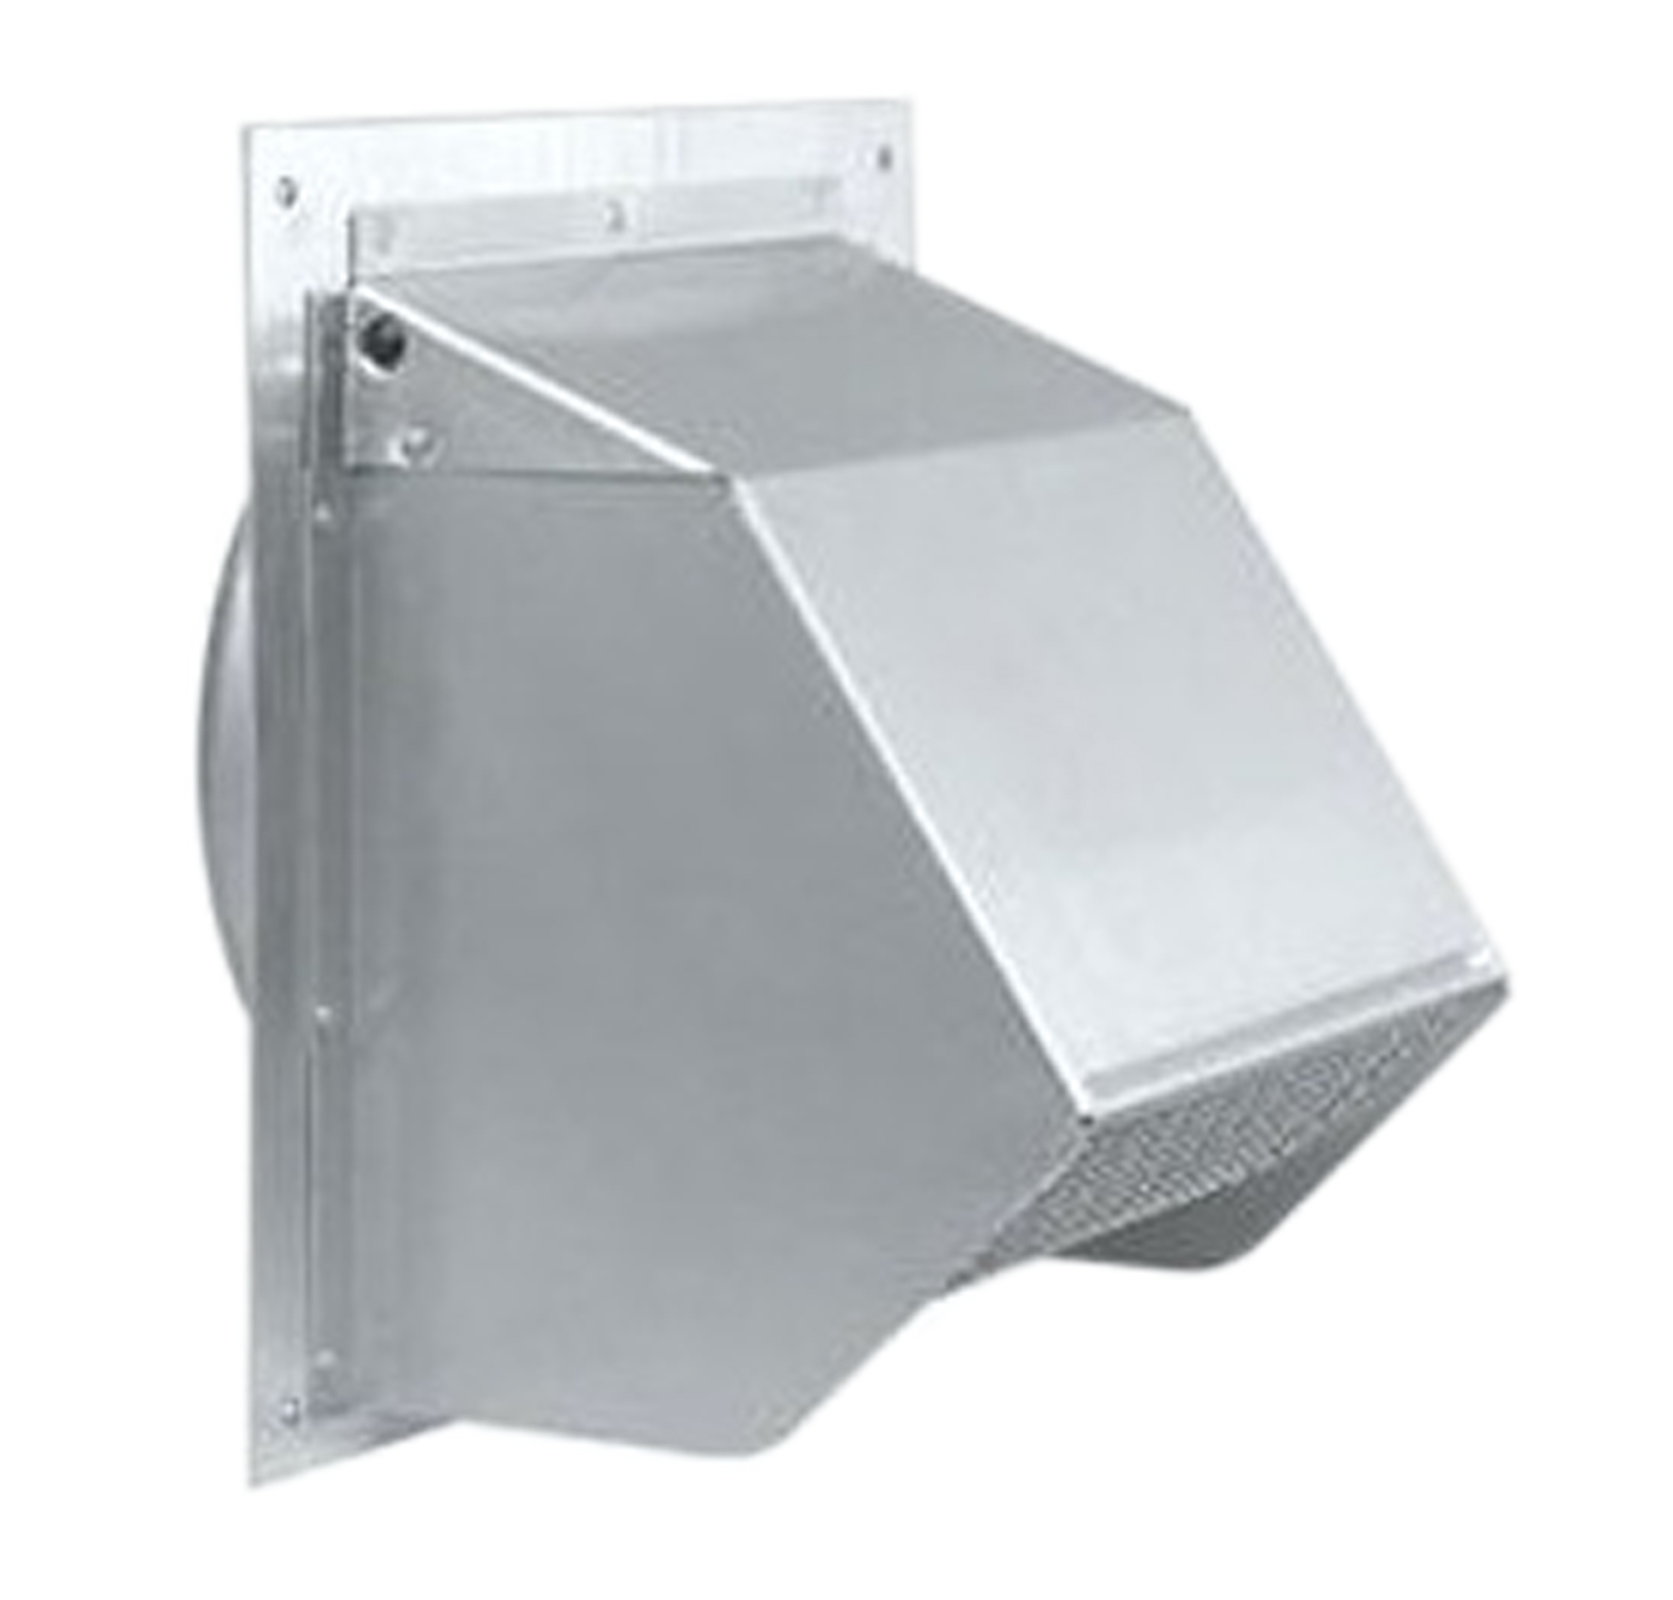 Broan 641FA  Fresh Air Inlet Wall Cap for 6" Round Duct for Range Hoods and Bath Ventilation Fans